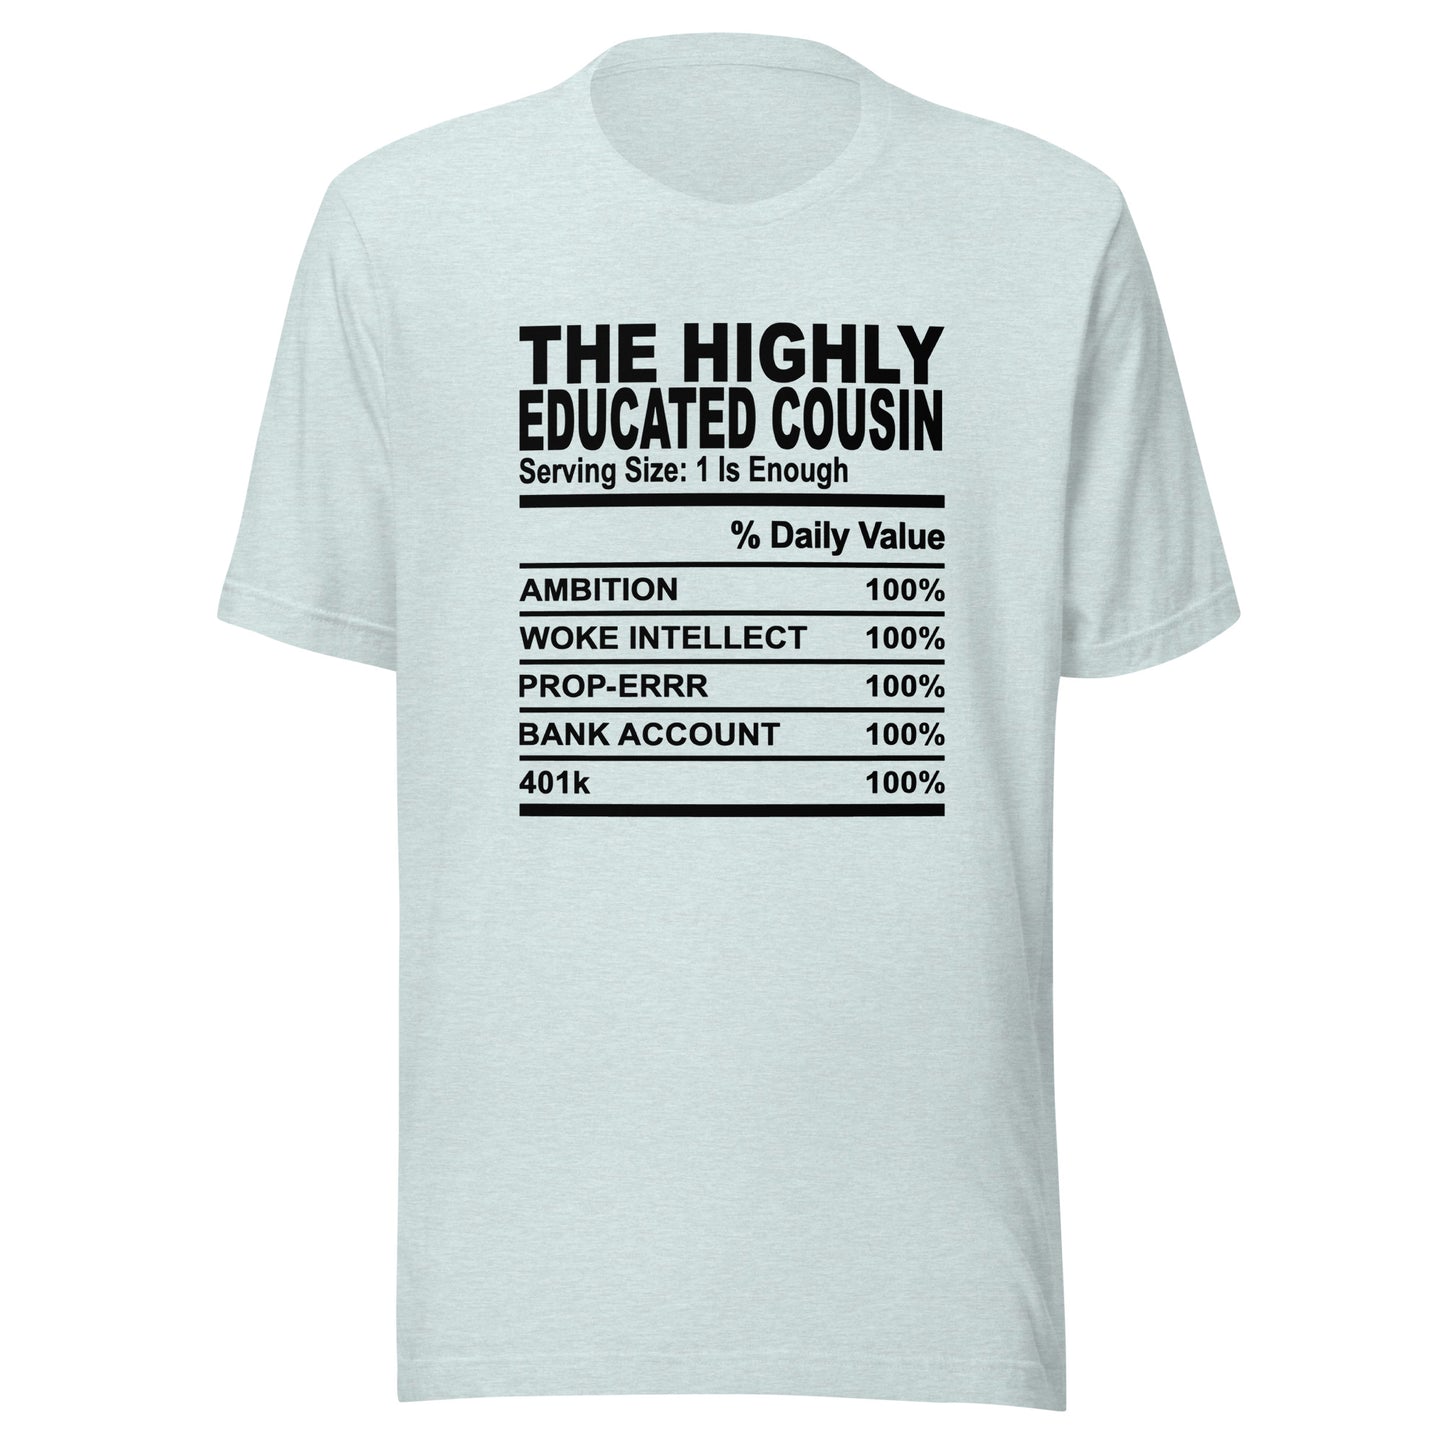 THE HIGHLY EDUCATED COUSIN - 2XL-3XL - Unisex T-Shirt (black print)